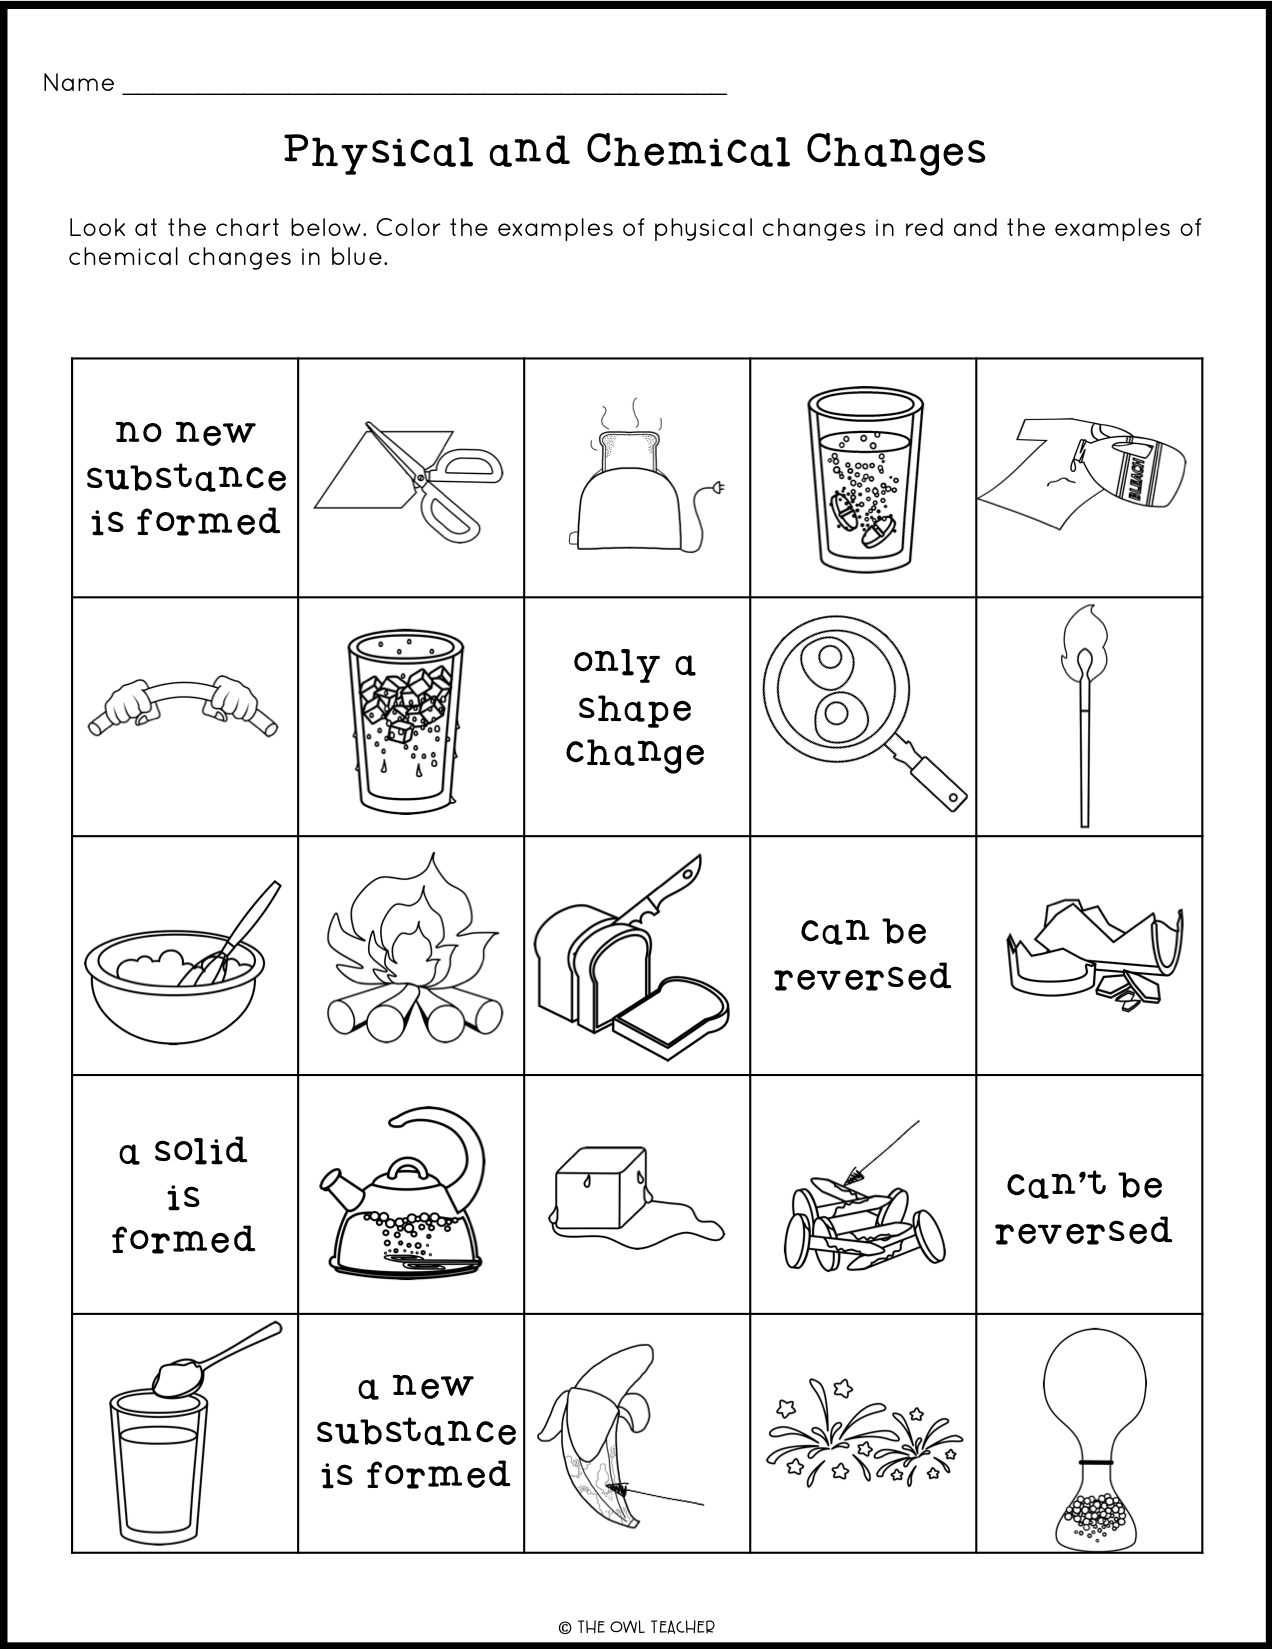 Physical and Chemical Changes Craftivity - The Owl Teacher In Chemical And Physical Changes Worksheet